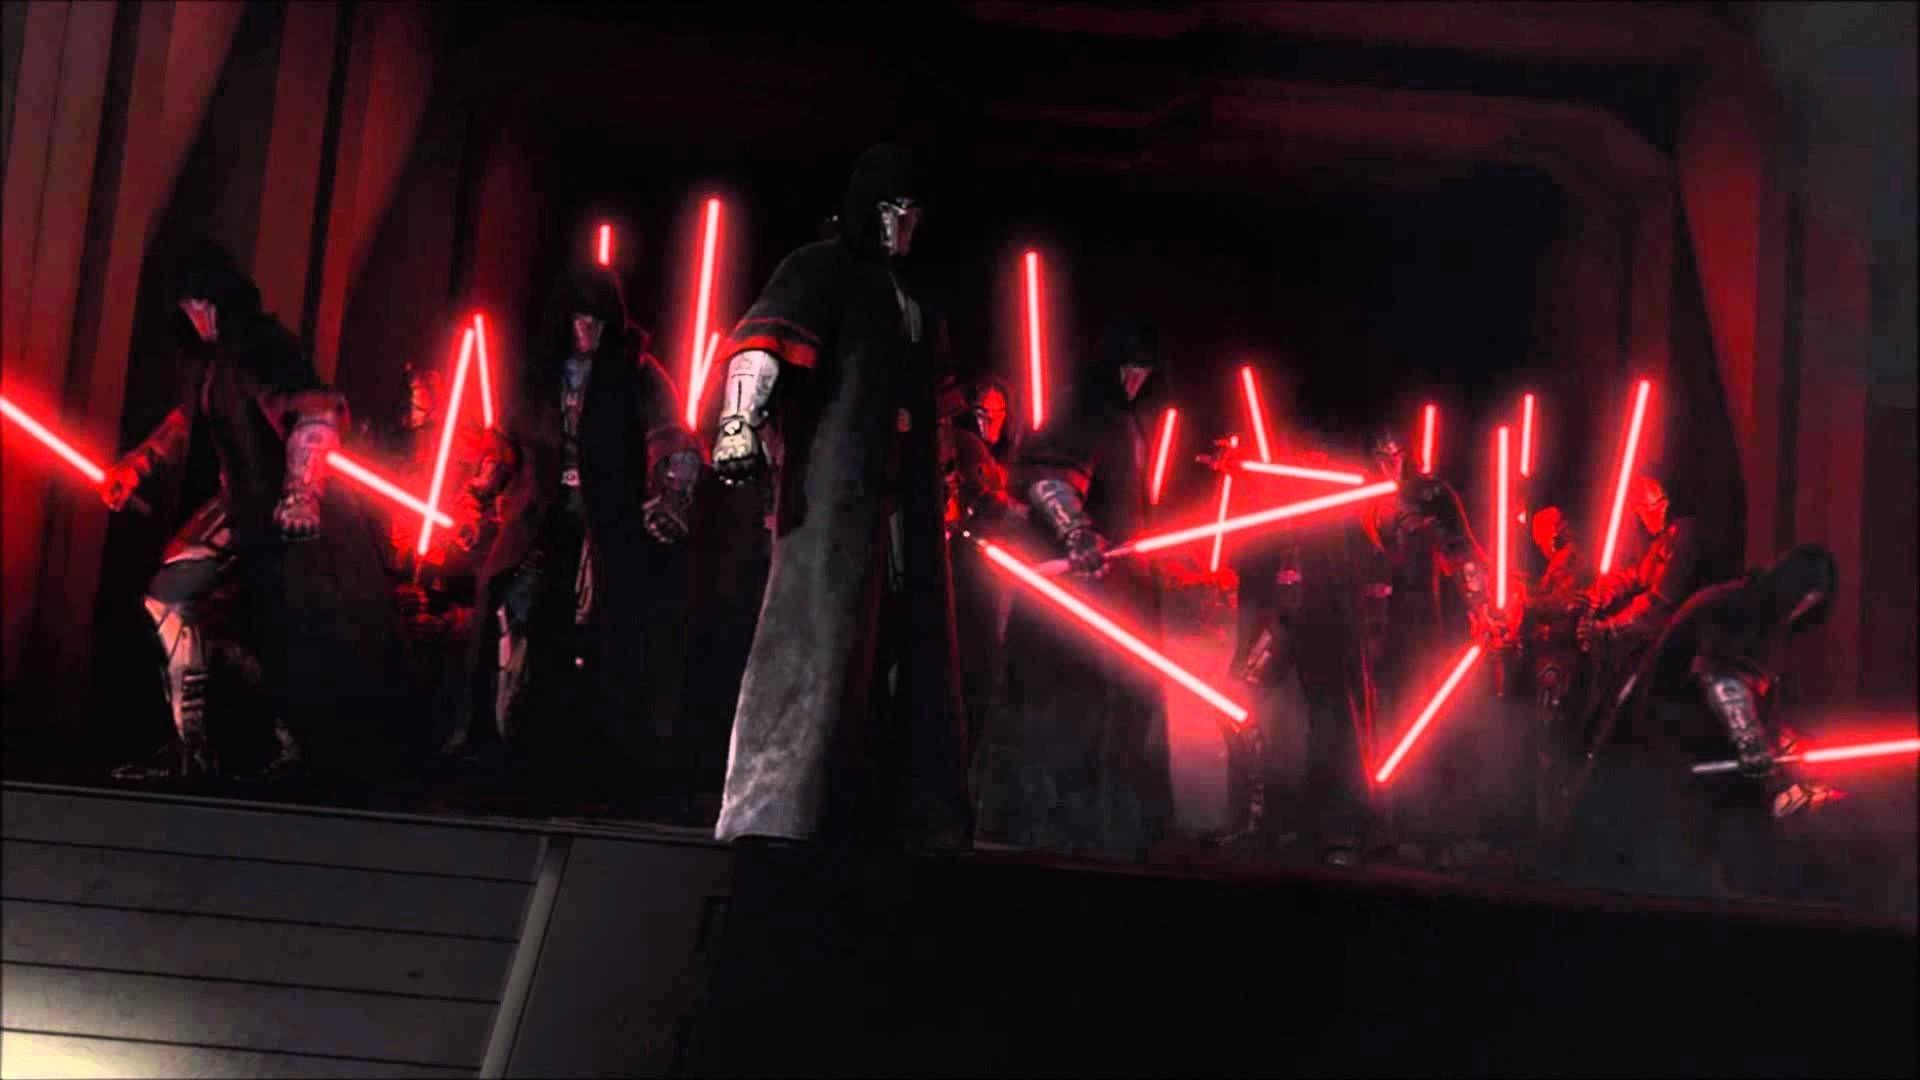 Star Wars Sith Wallpaper For Android #qgd6 1920x1080 px 83.10 KB